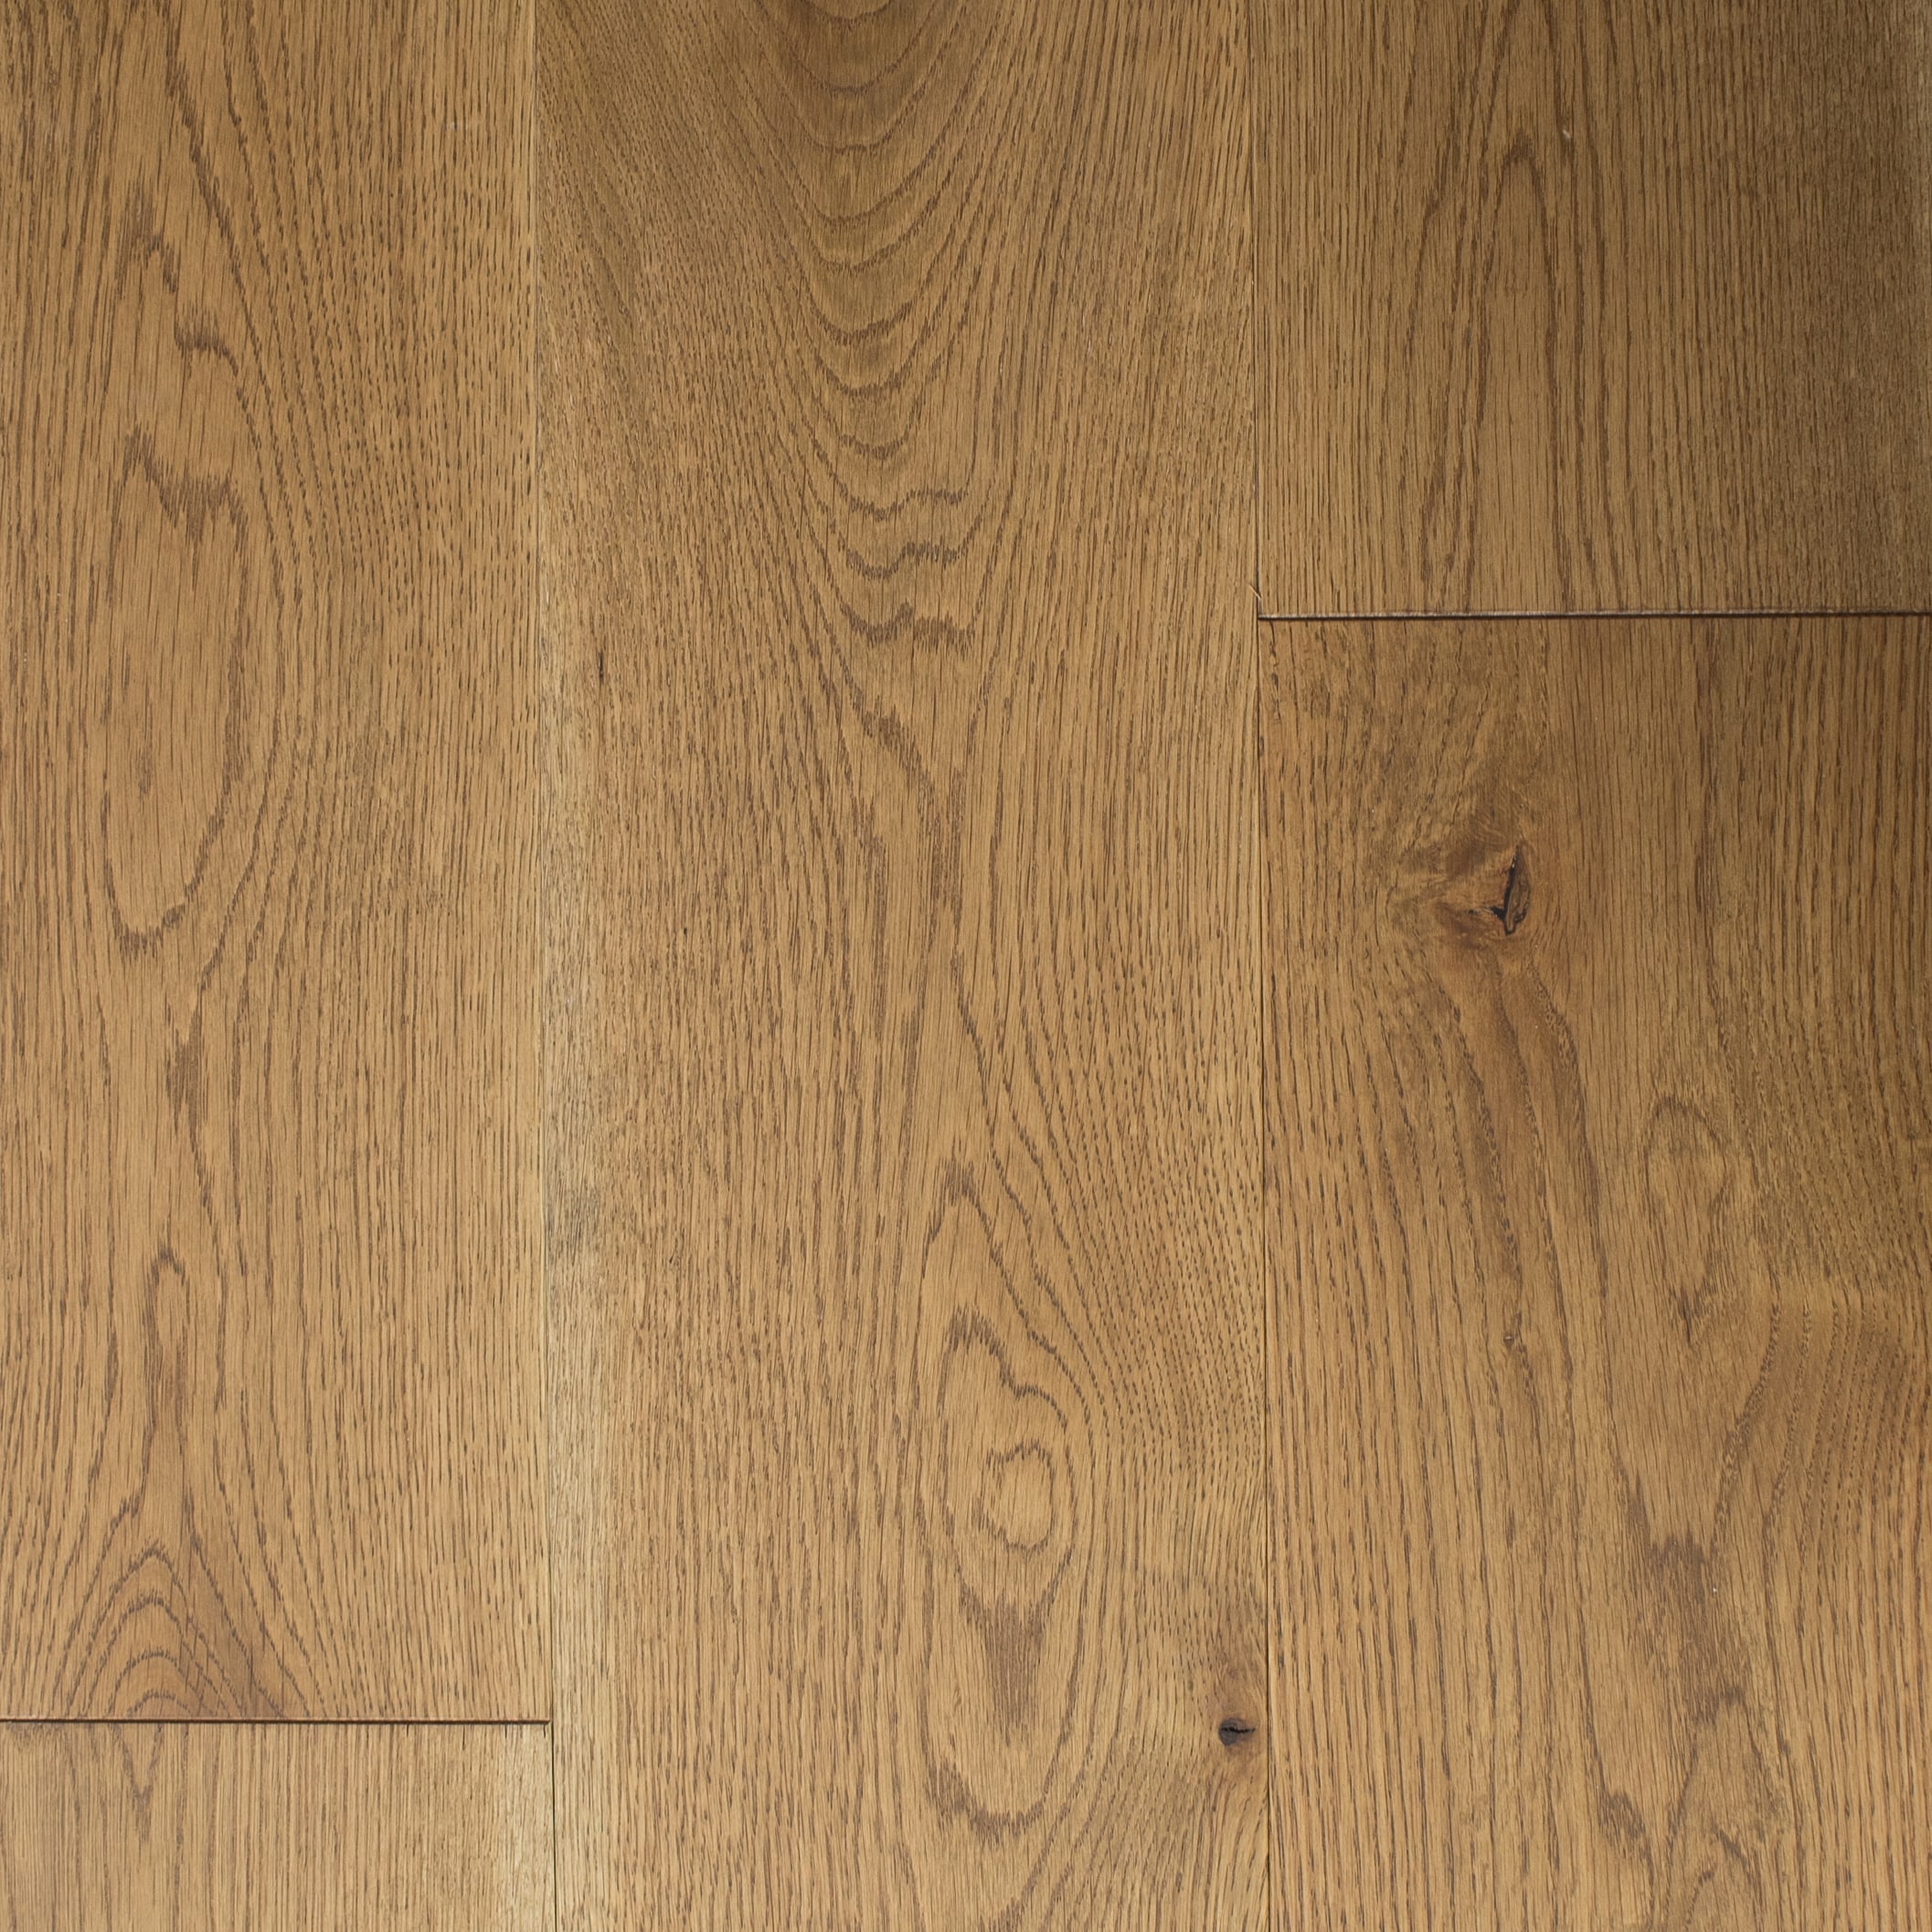 Aged Lodge White Oak 6-1/2-in W x 7/16-in T x Varying Length Wirebrushed Engineered Hardwood Flooring (24.5-sq ft) in Brown | - allen + roth 25372